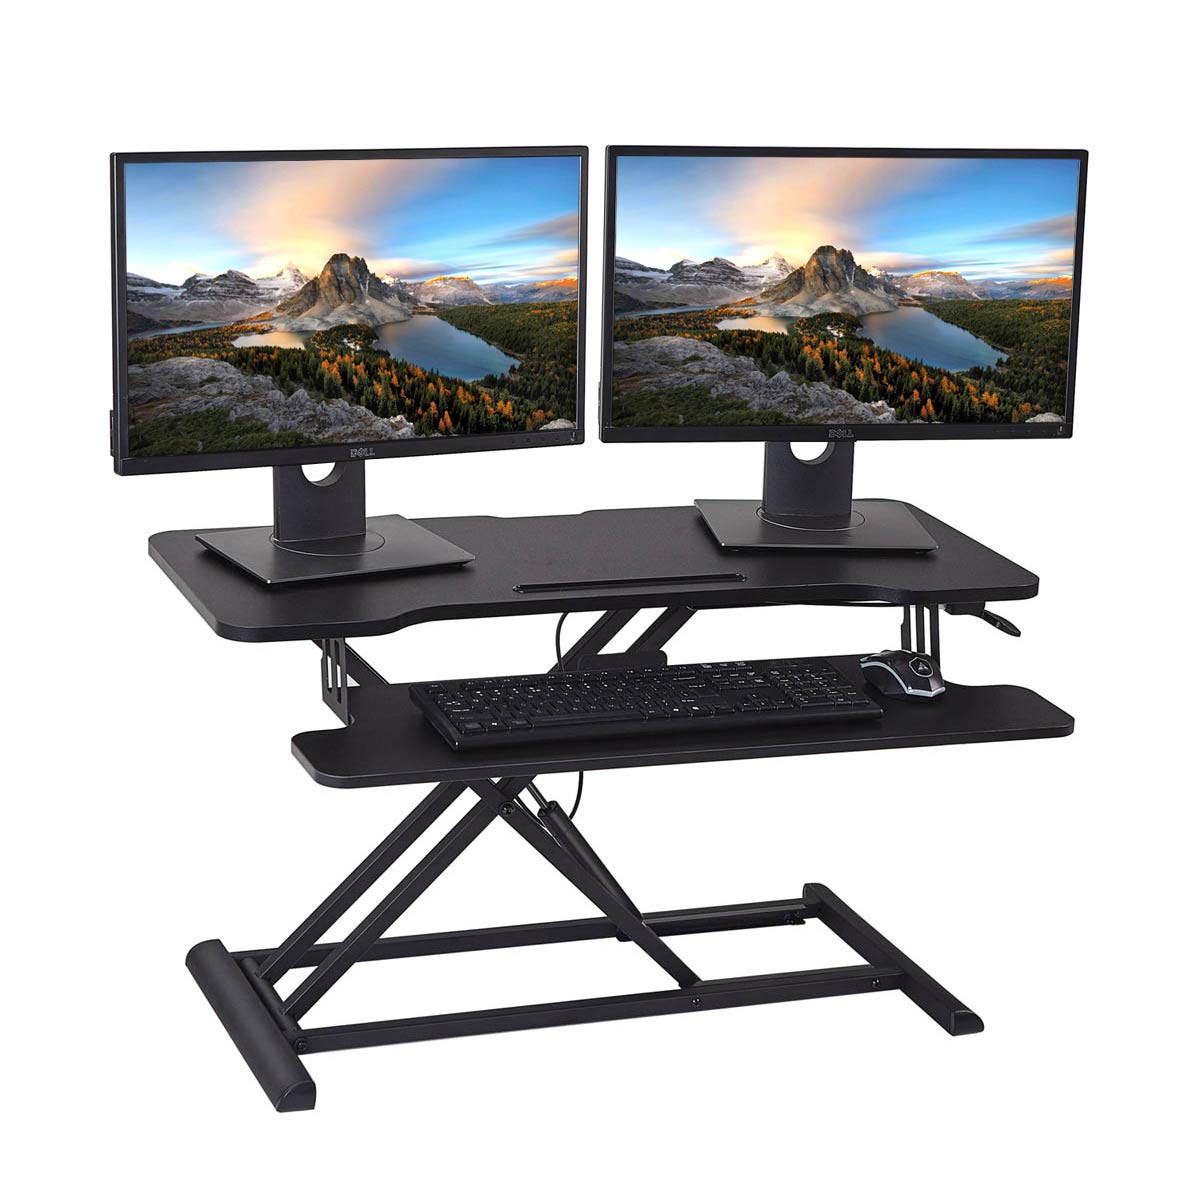 HUVIBE Height Adjustable Standing Desk Converter, 36 inch Stand Up Desk Riser, Sit Stand Desk for Dual Monitors and Laptops with Keyboard+Mouse Tray